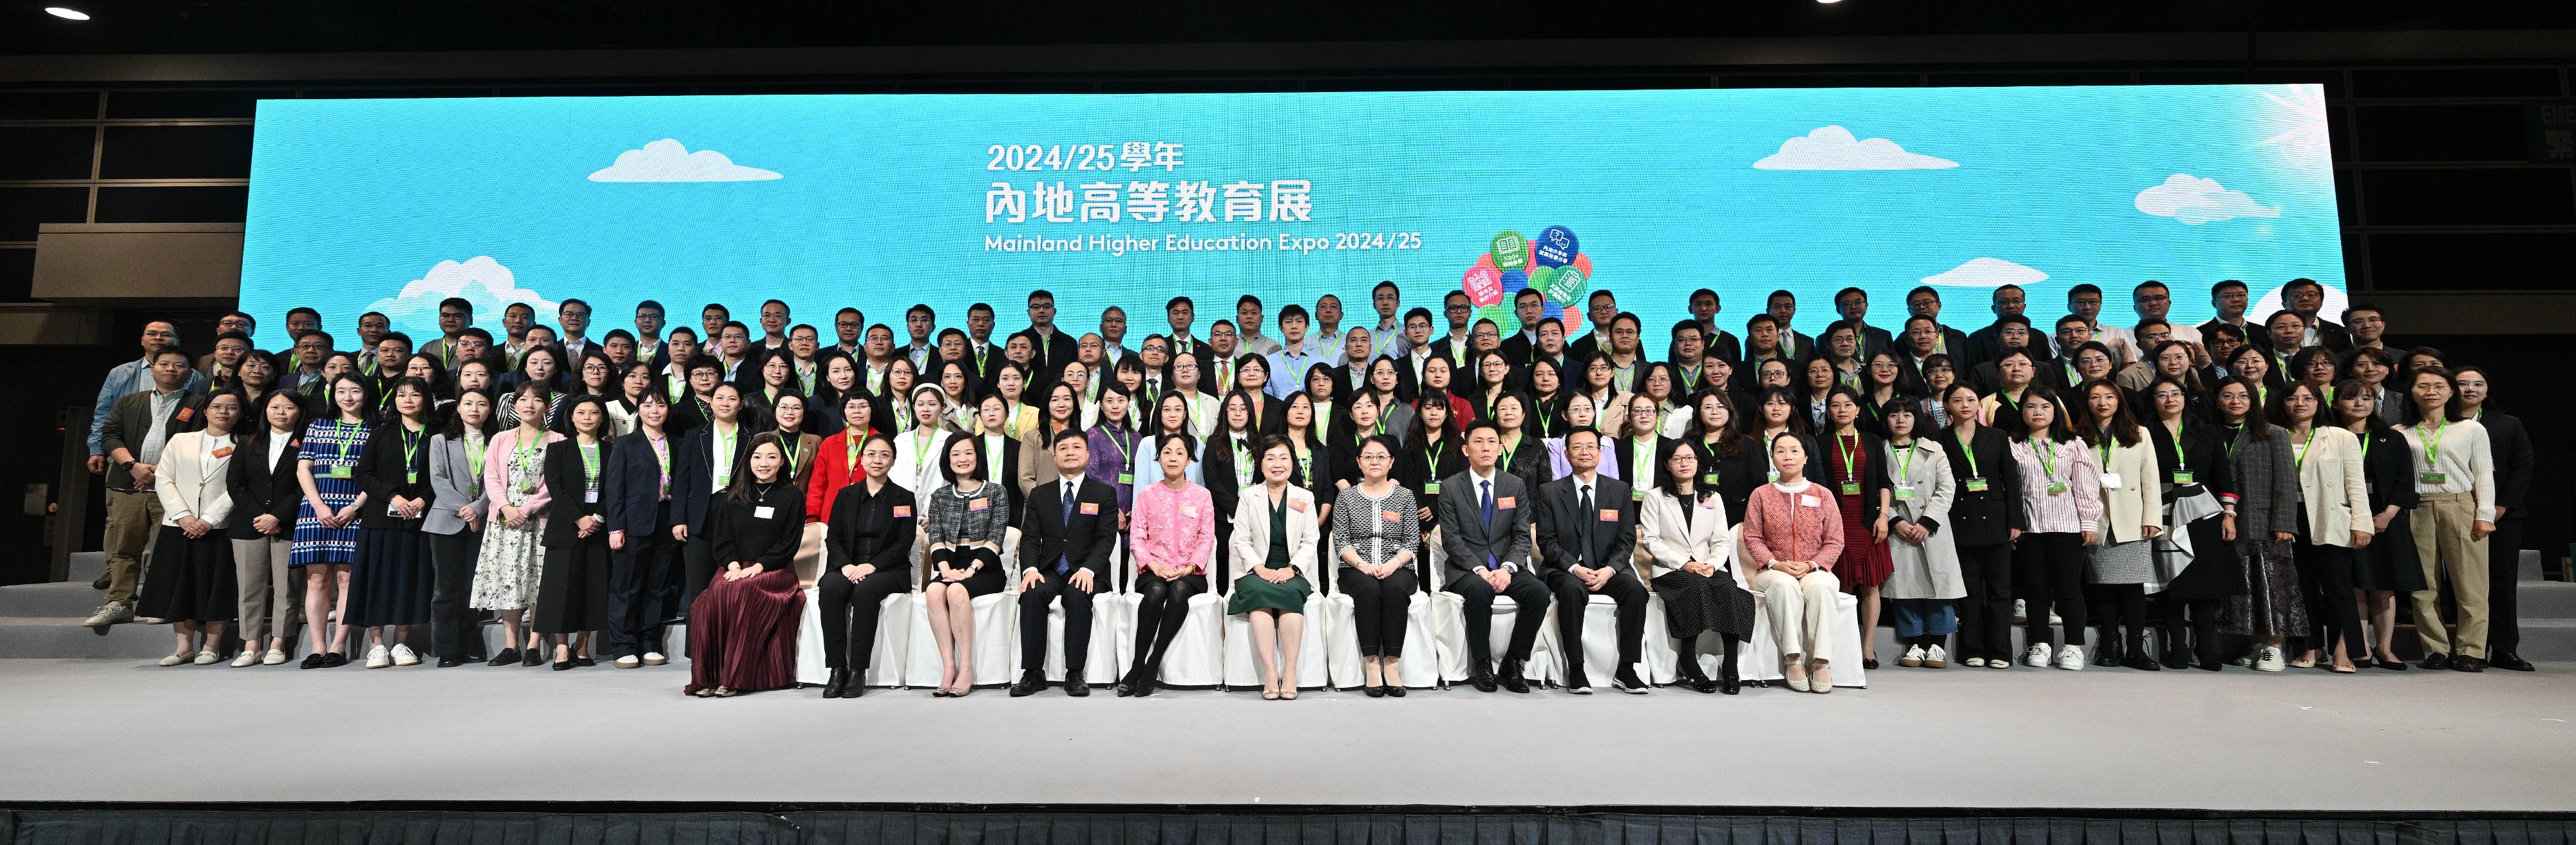 The Mainland Higher Education Expo 2024/25, jointly organised by the Ministry of Education and the Education Bureau, is being held today and tomorrow (December 2 and 3) at the Hong Kong Convention and Exhibition Centre in Wan Chai. Photo shows the Secretary for Education, Dr Choi Yuk-lin (first row, centre), with officiating guests and representatives of institutions.